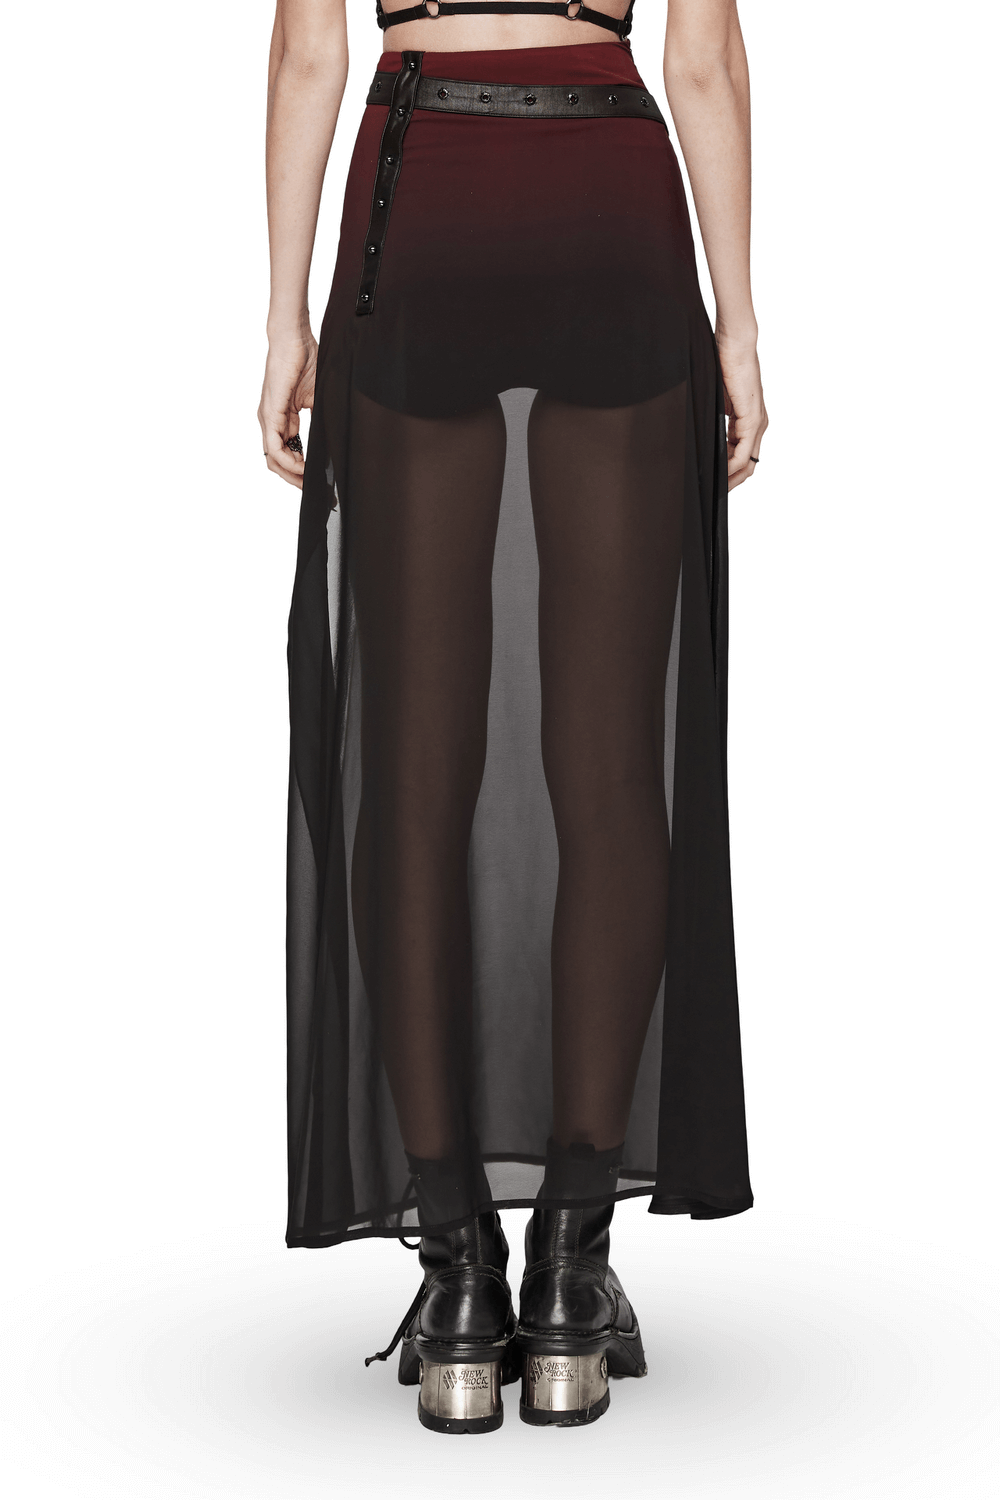 Chic Sheer Maxi A-Line Skirt With High Slit and Belt